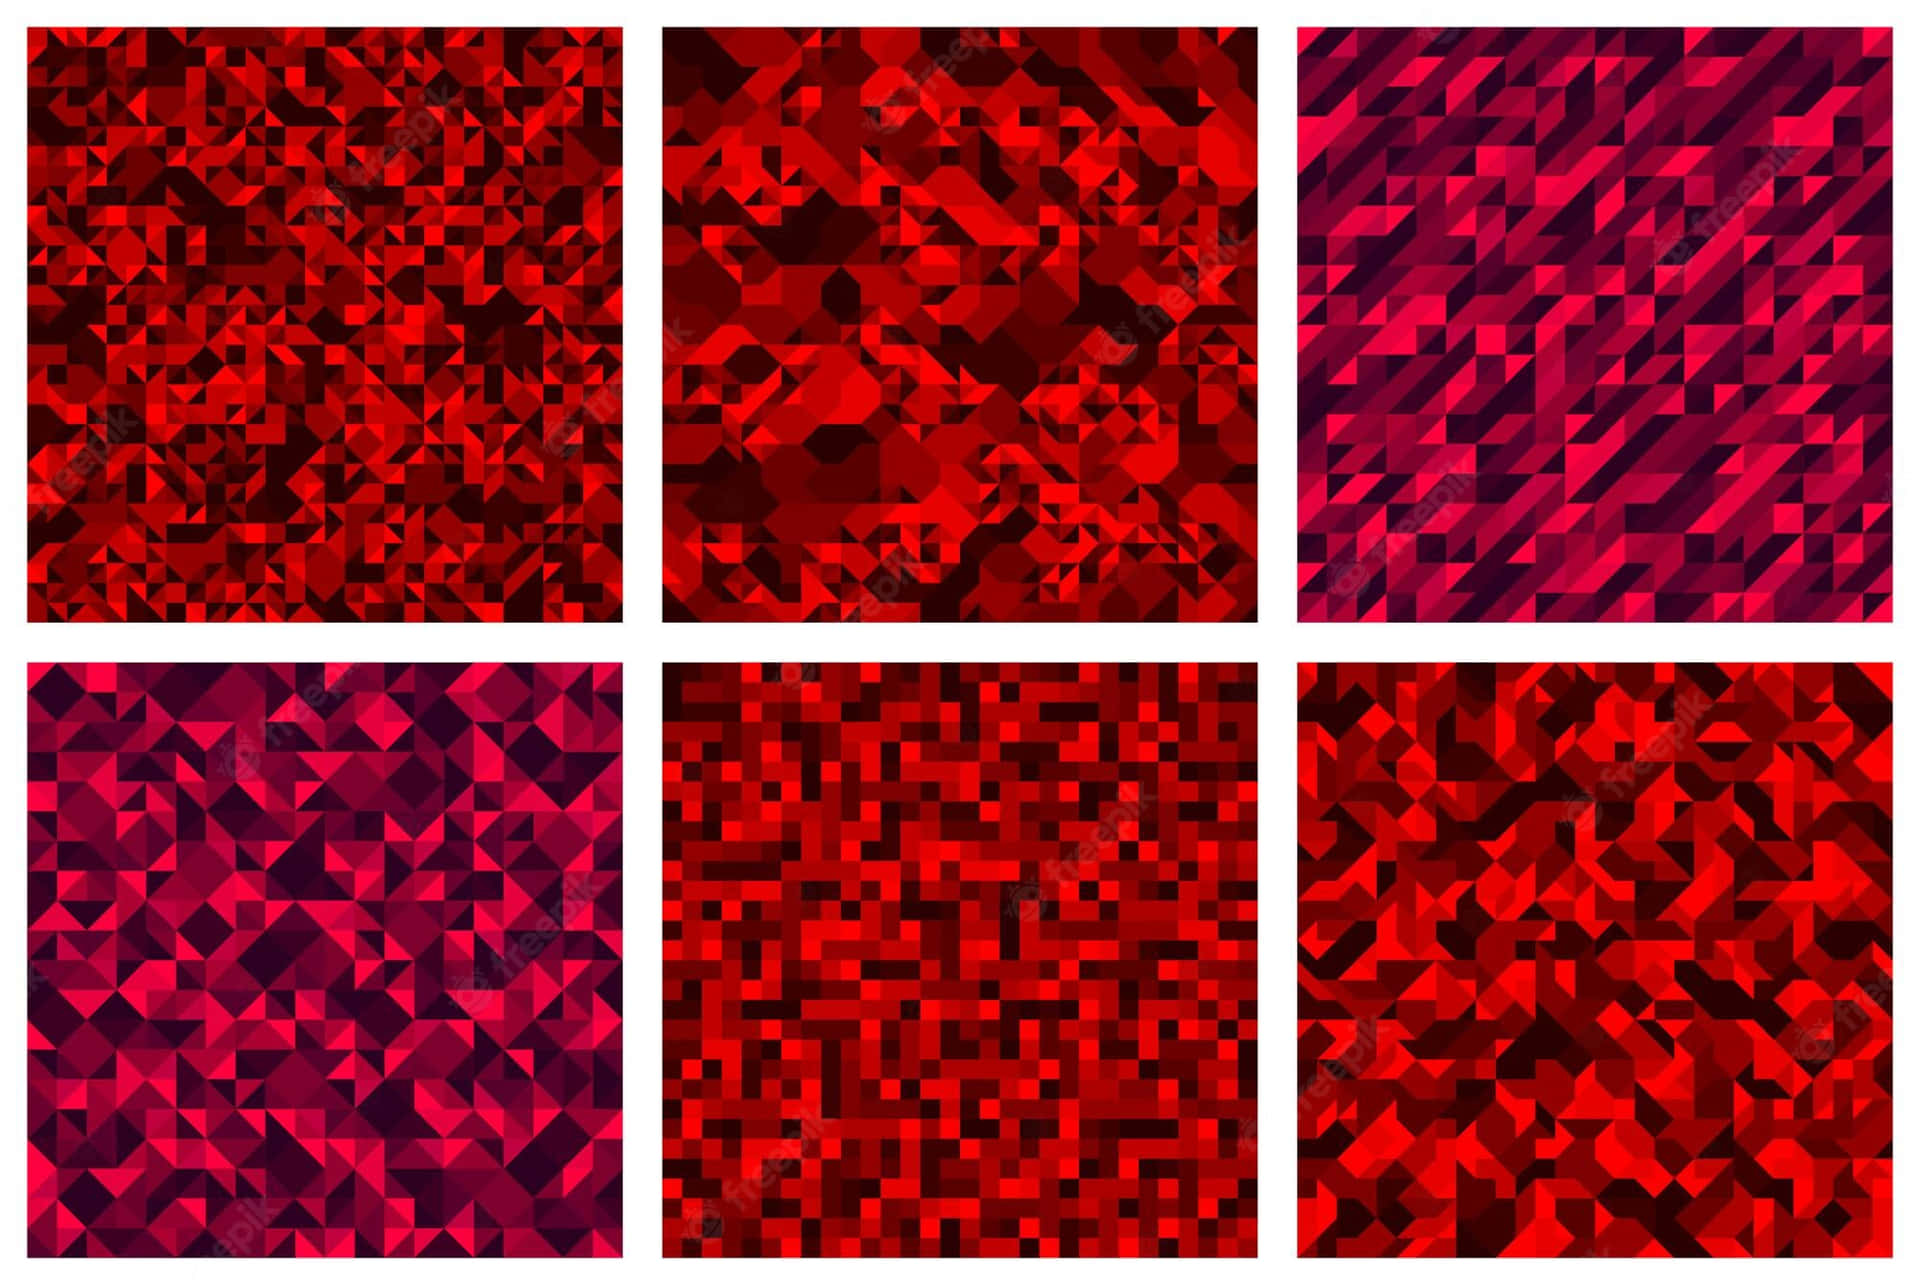 Red Collage Wallpaper- red blocks of artistic chaos Wallpaper